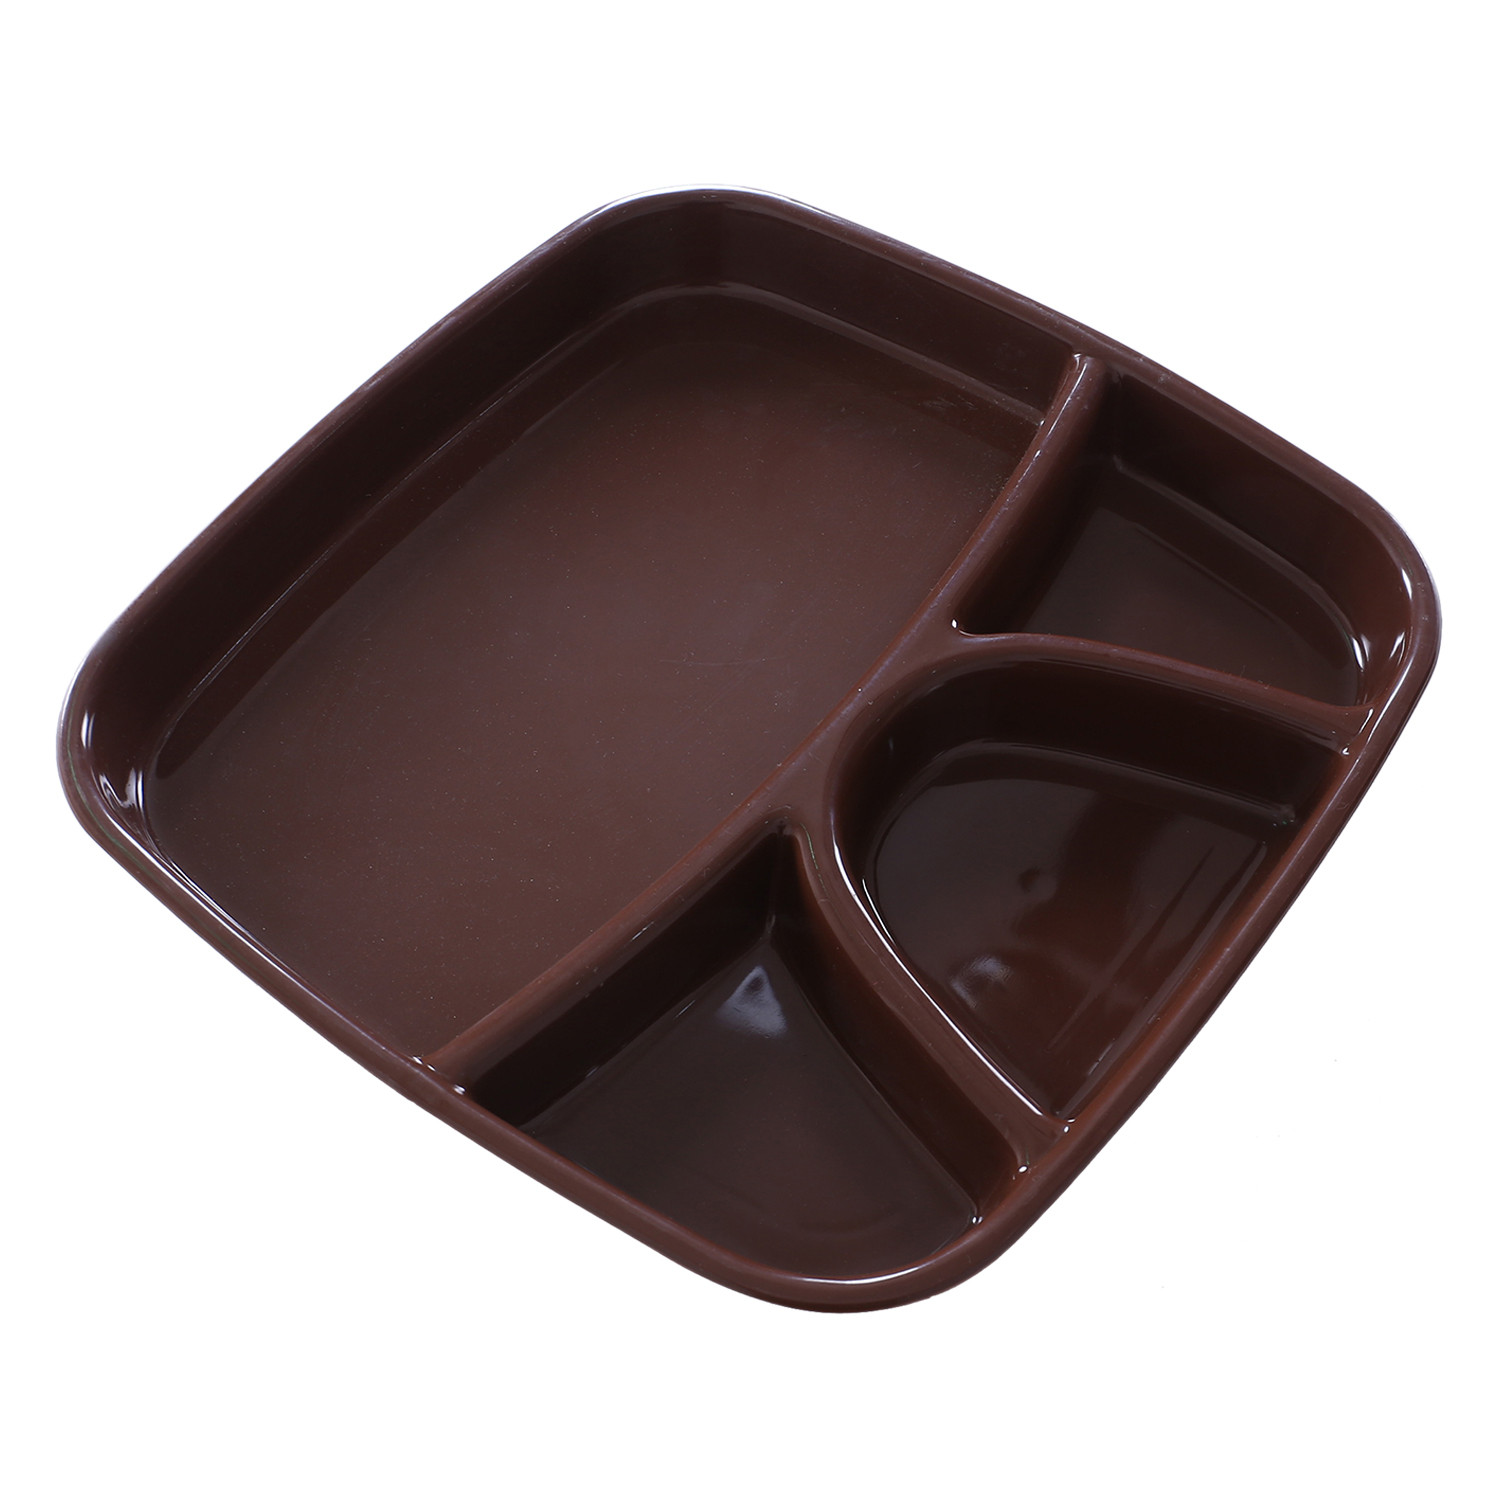 Kuber Industries Serving Plate|Plate Set For Dinner|Unbreakable Plastic Plates|Microwave Safe Plates|Food Organizer With 4 Partitions|(Brown)